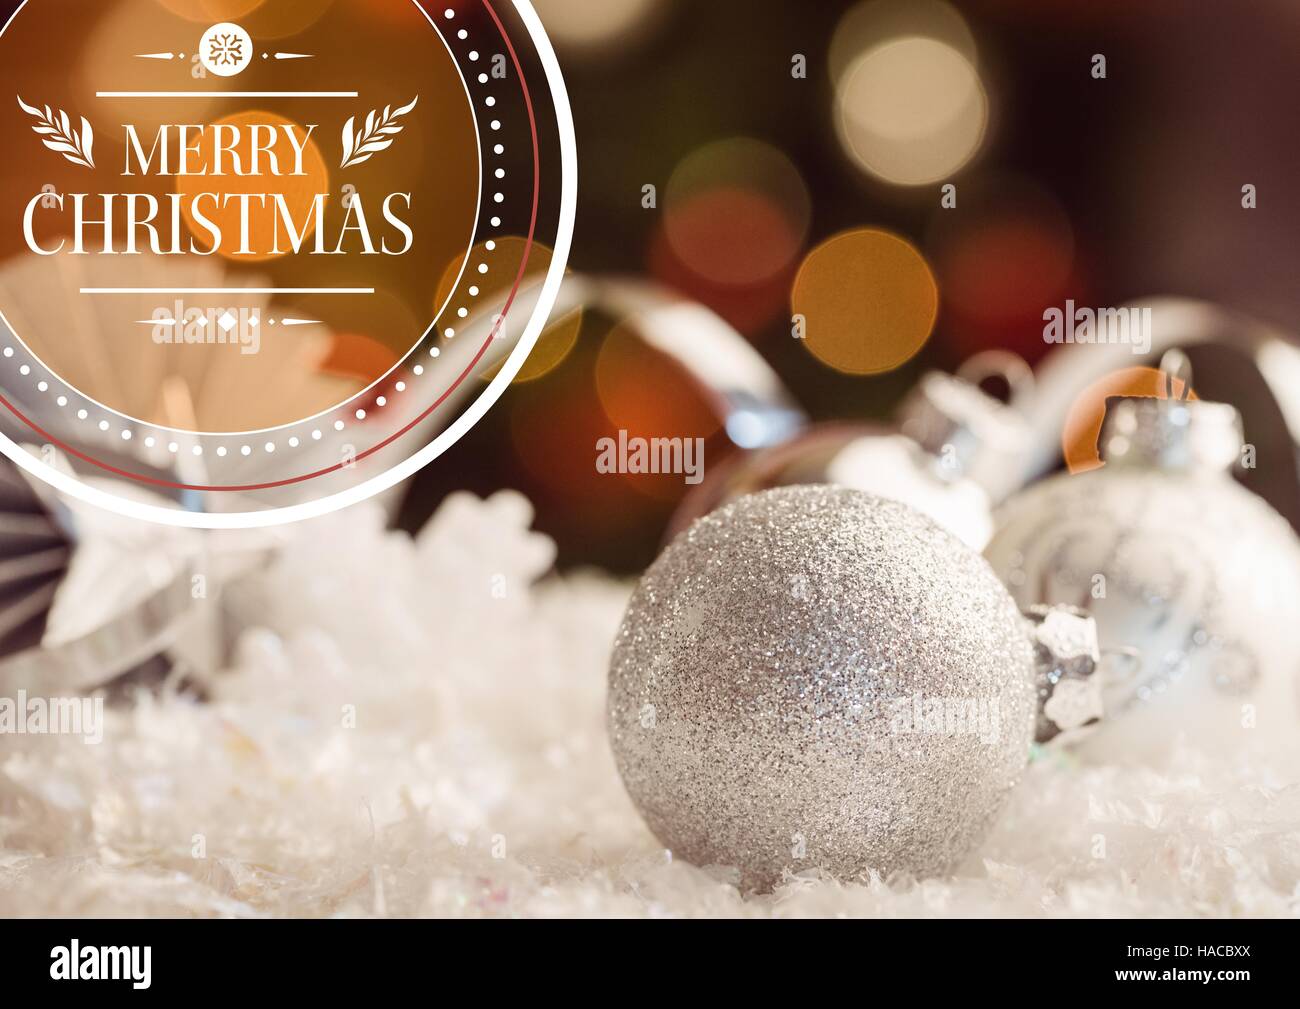 Digitally composite image of merry christmas wishes against baubles decoration Stock Photo